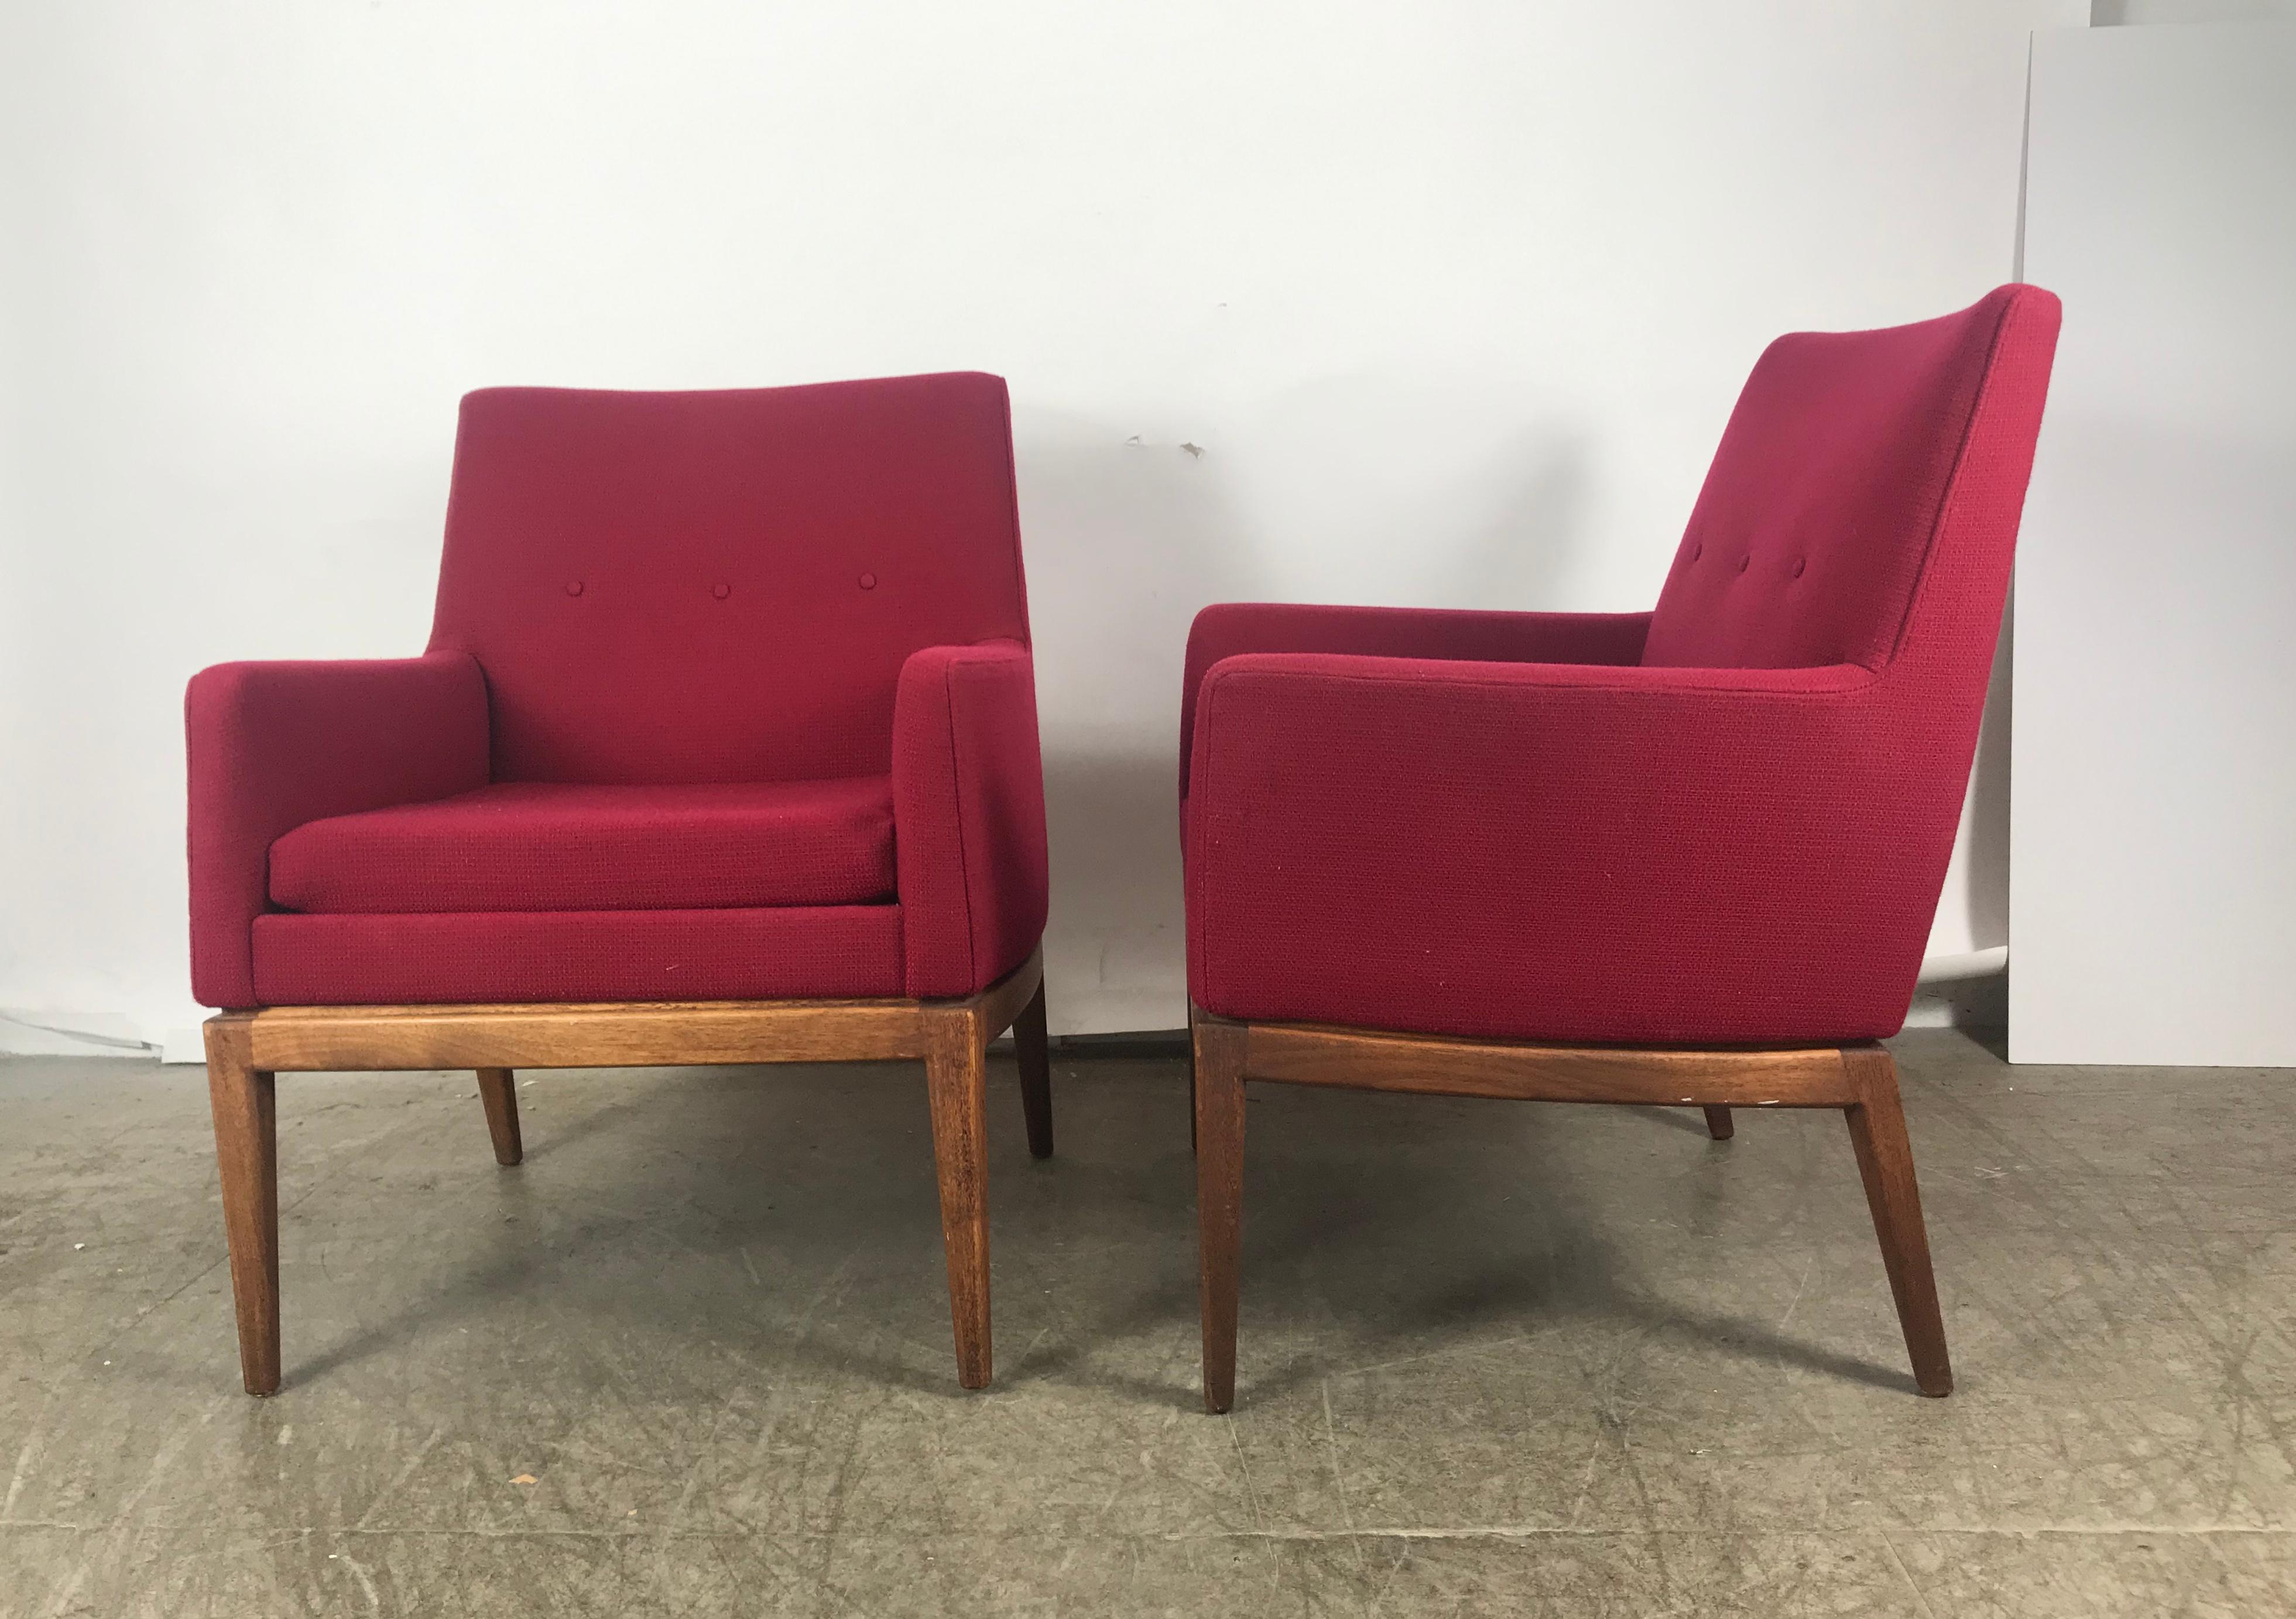 Classic modernist lounge chairs designed by Jens Risom, original labels Jens Risom Design Inc. Superior quality and construction, Retains original hot pink color high end wool fabric, sturdy, solid walnut wood frames, Classic styling, extremely